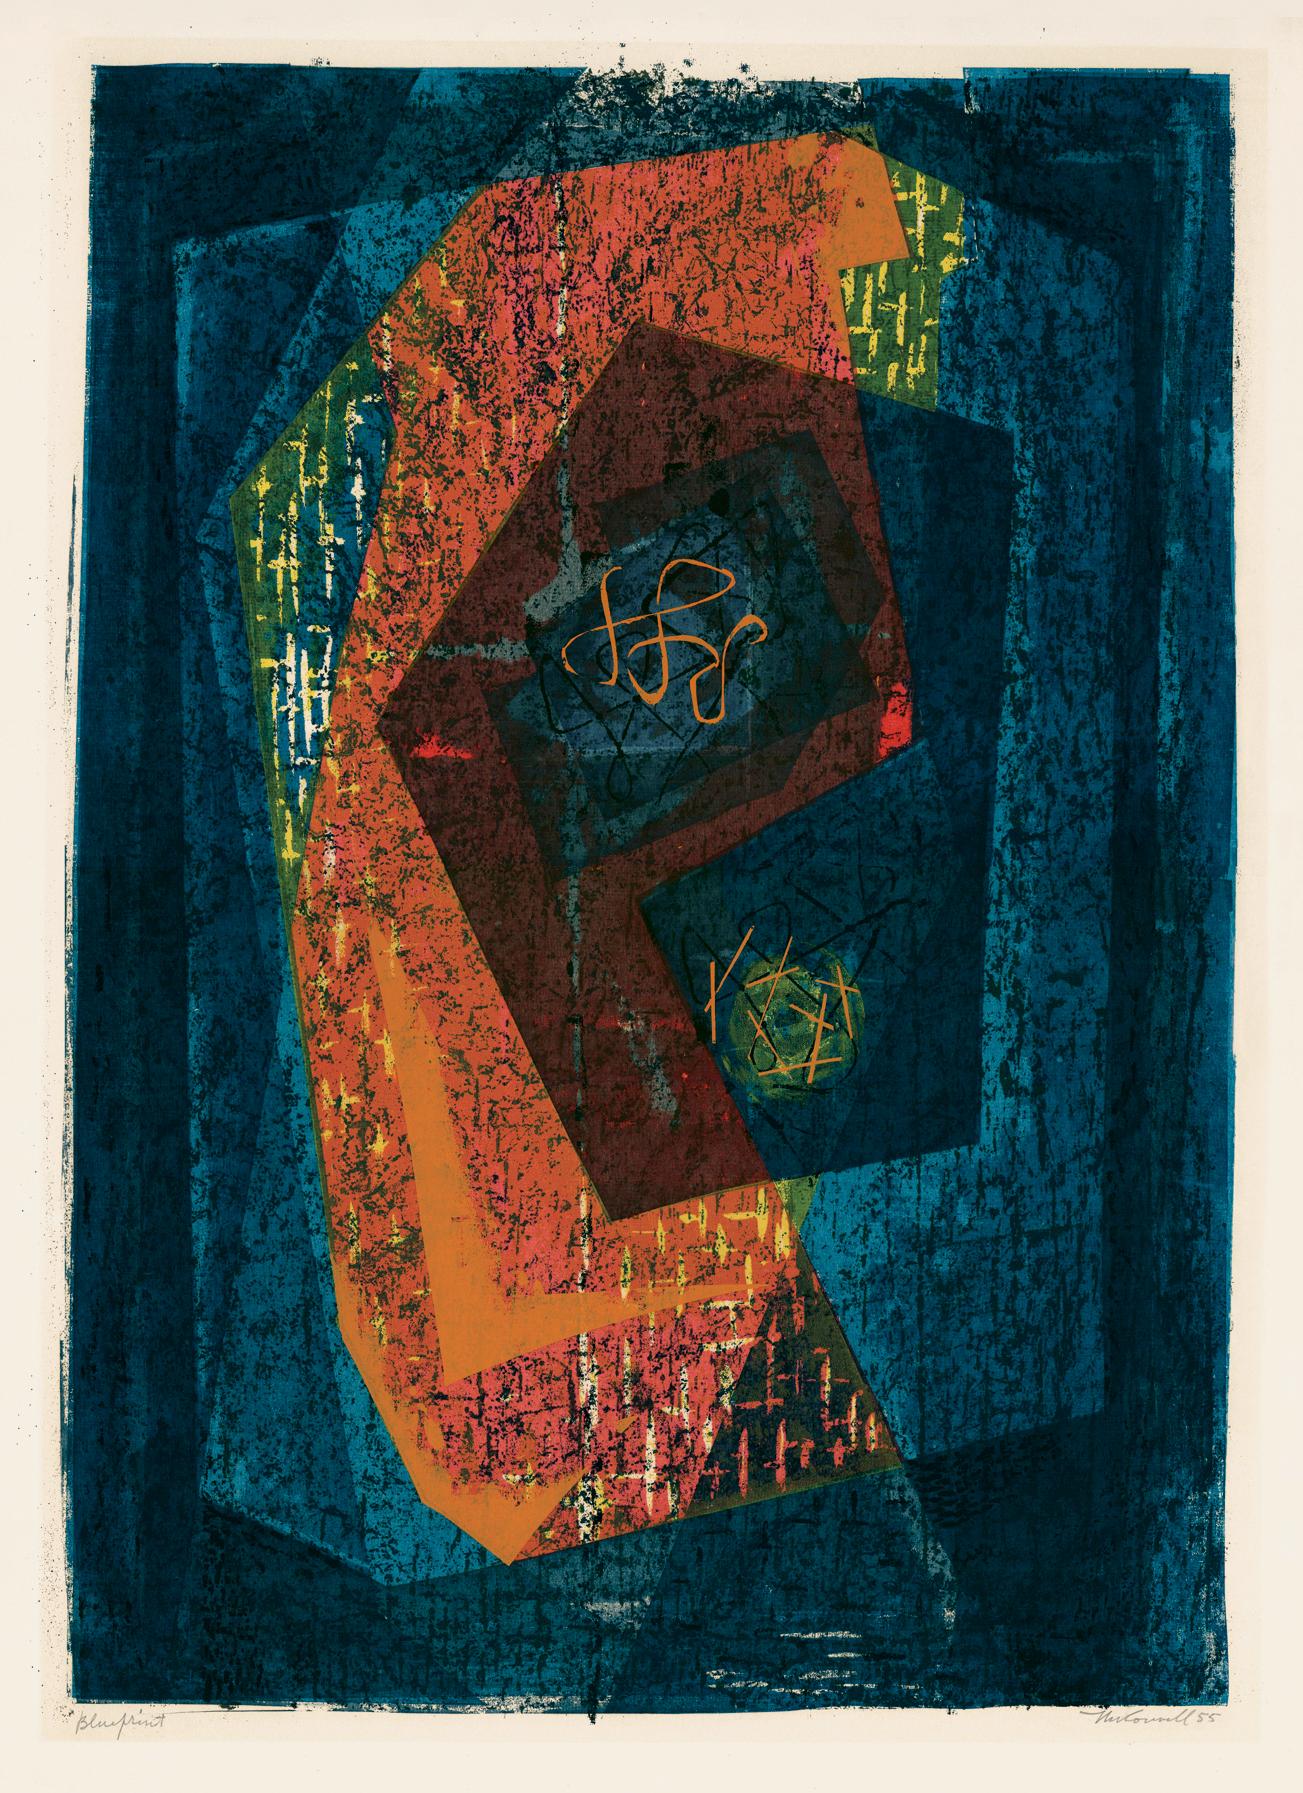 James Houston McConnell Abstract Print - 'Blueprint' — Mid-century Modernist Abstraction